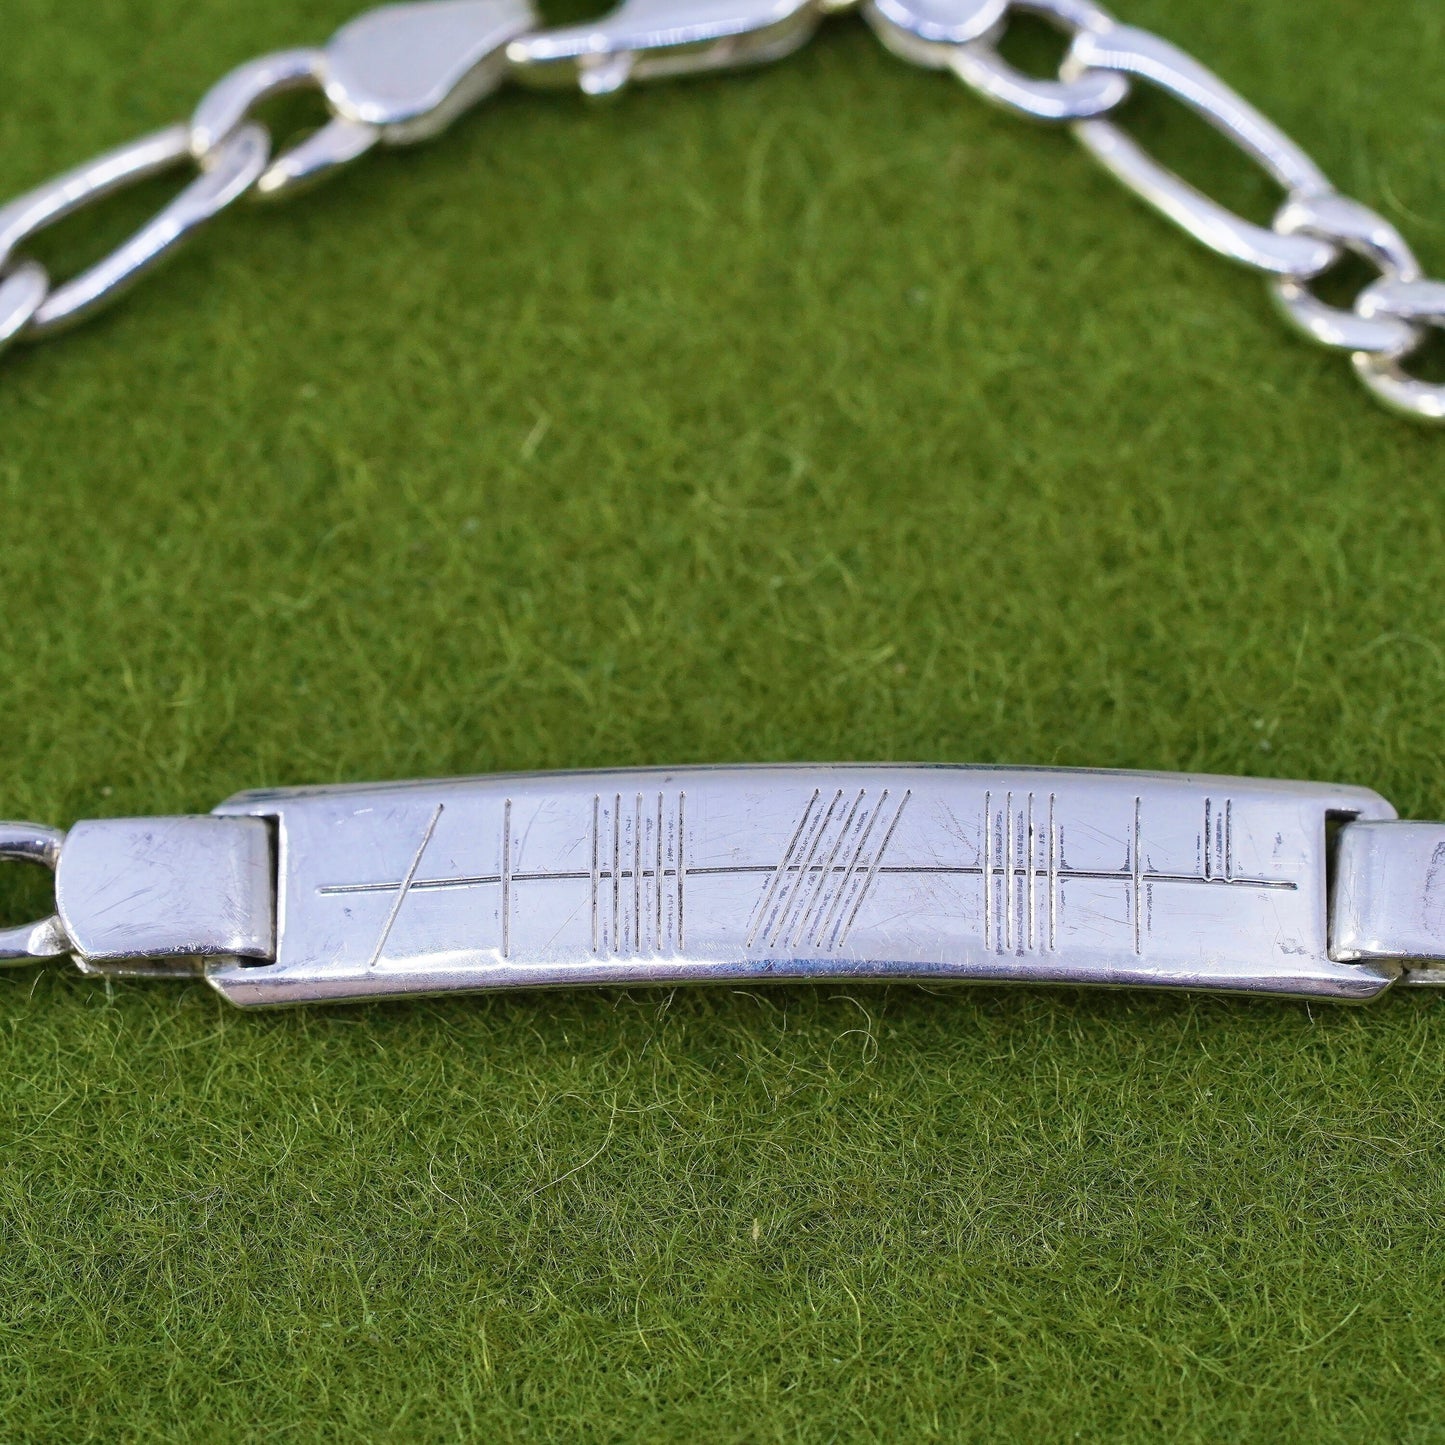 7.25” sterling silver bracelet, 925 figaro chain with line engraved bar tag